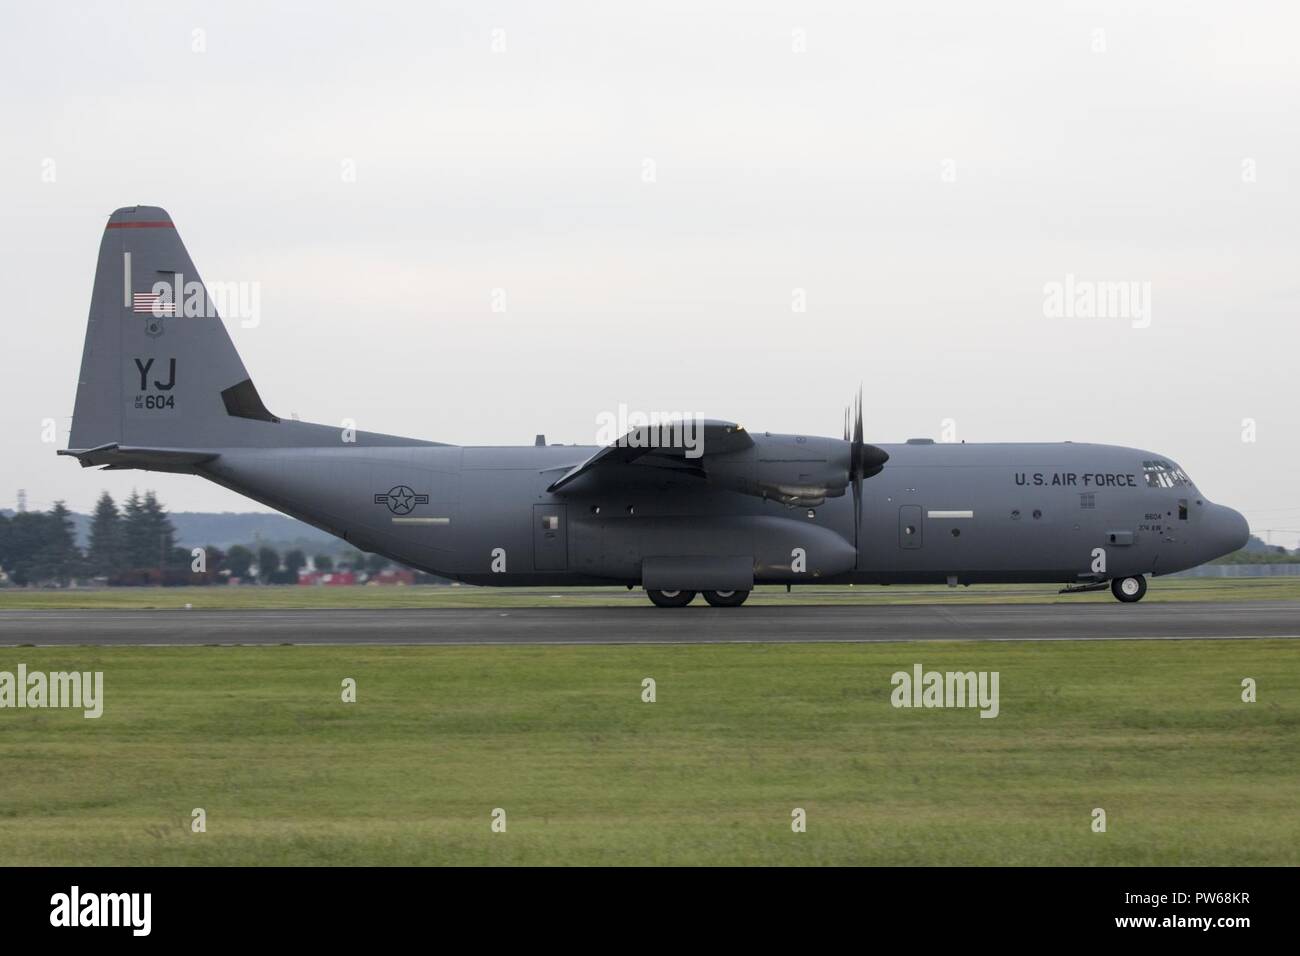 A C-130J Super Hercules assigned to the 36th Airlift Squadron lands at Yokota Air Base, Japan, Sept. 20, 2017. This is the fifth C-130J delivered to Yokota and the first from Ramstein Air Base. Crewmembers from the 36th Airlift Squadron flew halfway around the world to deliver an aircraft here. Yokota serves as the primary Western Pacific airlift hub for U.S. Air Force peacetime and contingency operations. Missions include tactical airland, airdrop, aeromedical evacuation, special operations and distinguished visitor airlift. Stock Photo